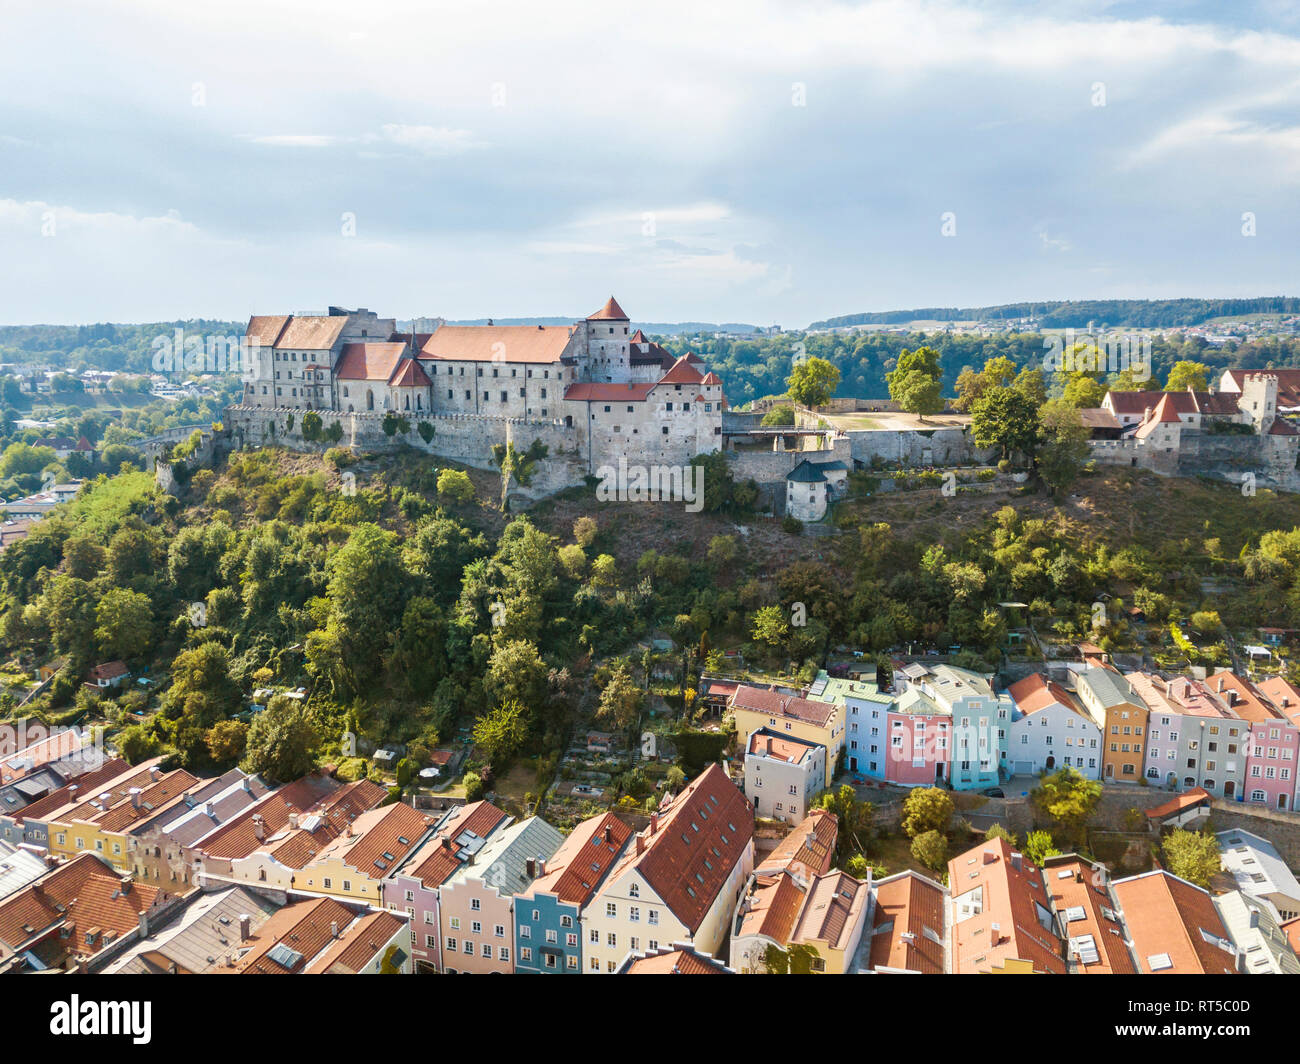 Germany, Bavaria, Burghausen, city view of old town and castle Stock Photo